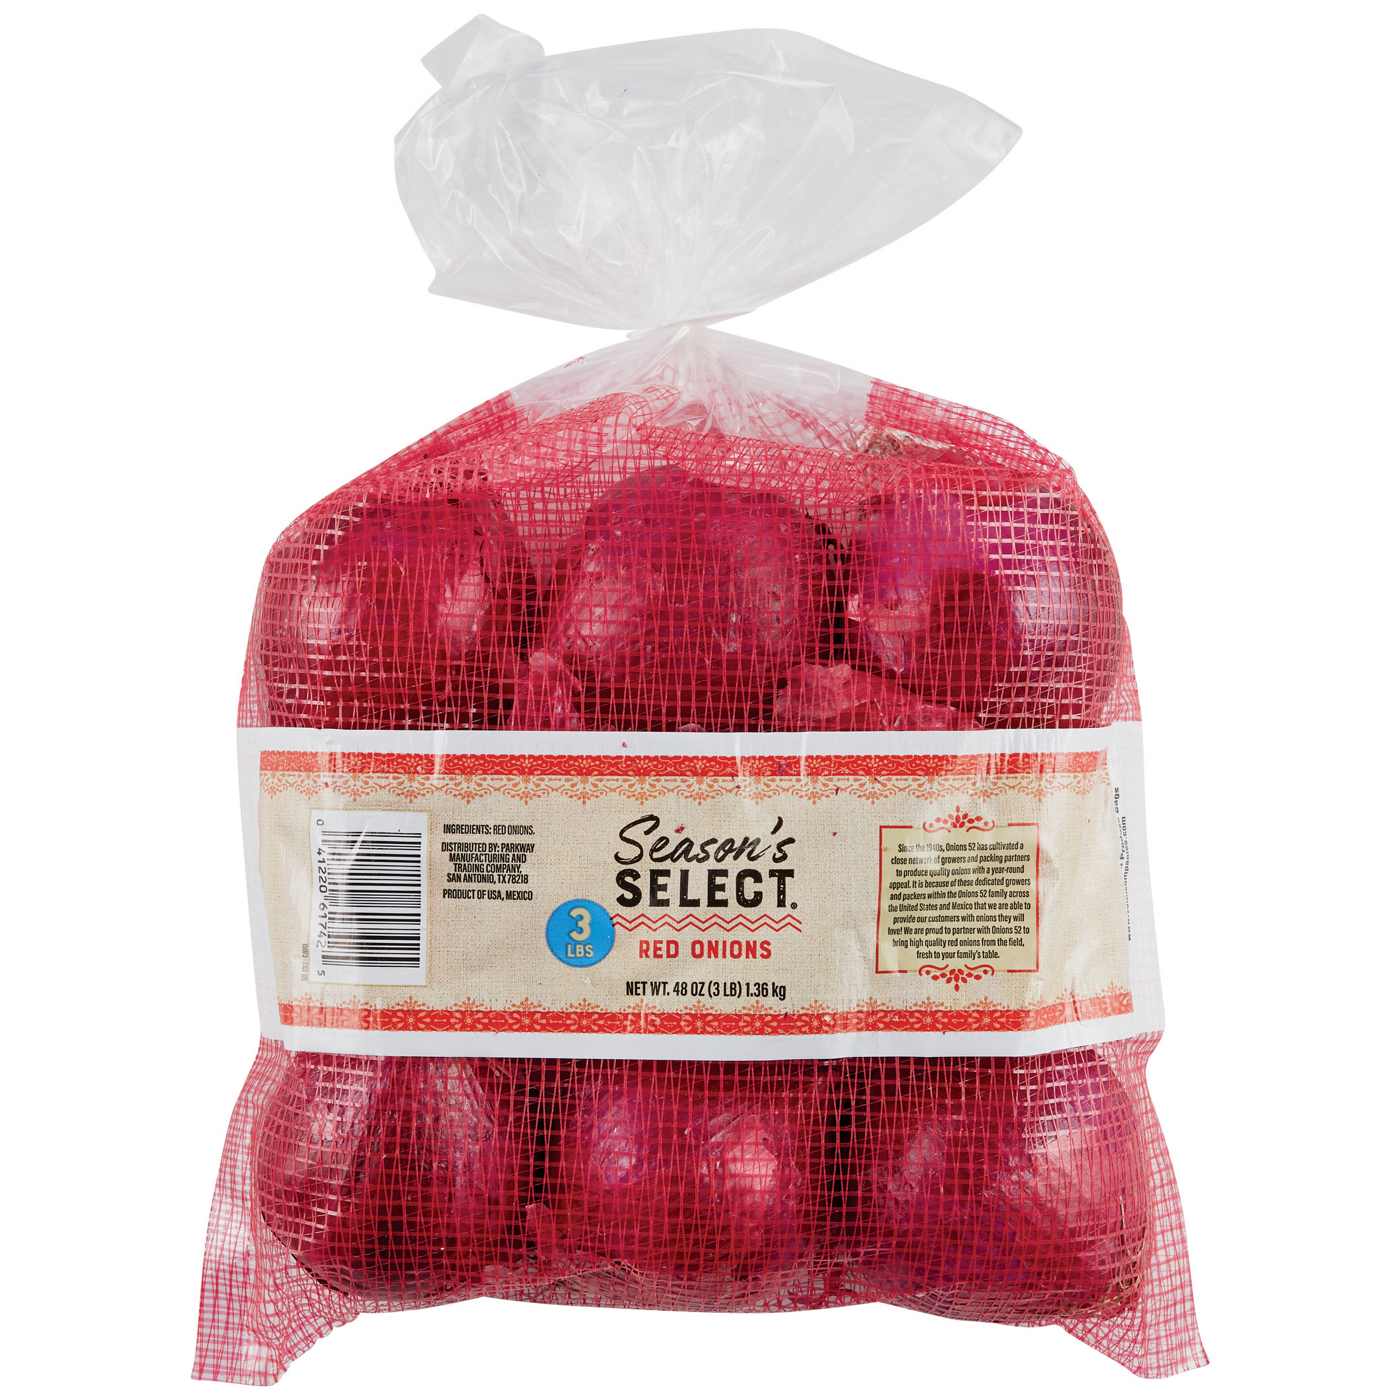 H-E-B Texas Roots Fresh Red Onions; image 1 of 3